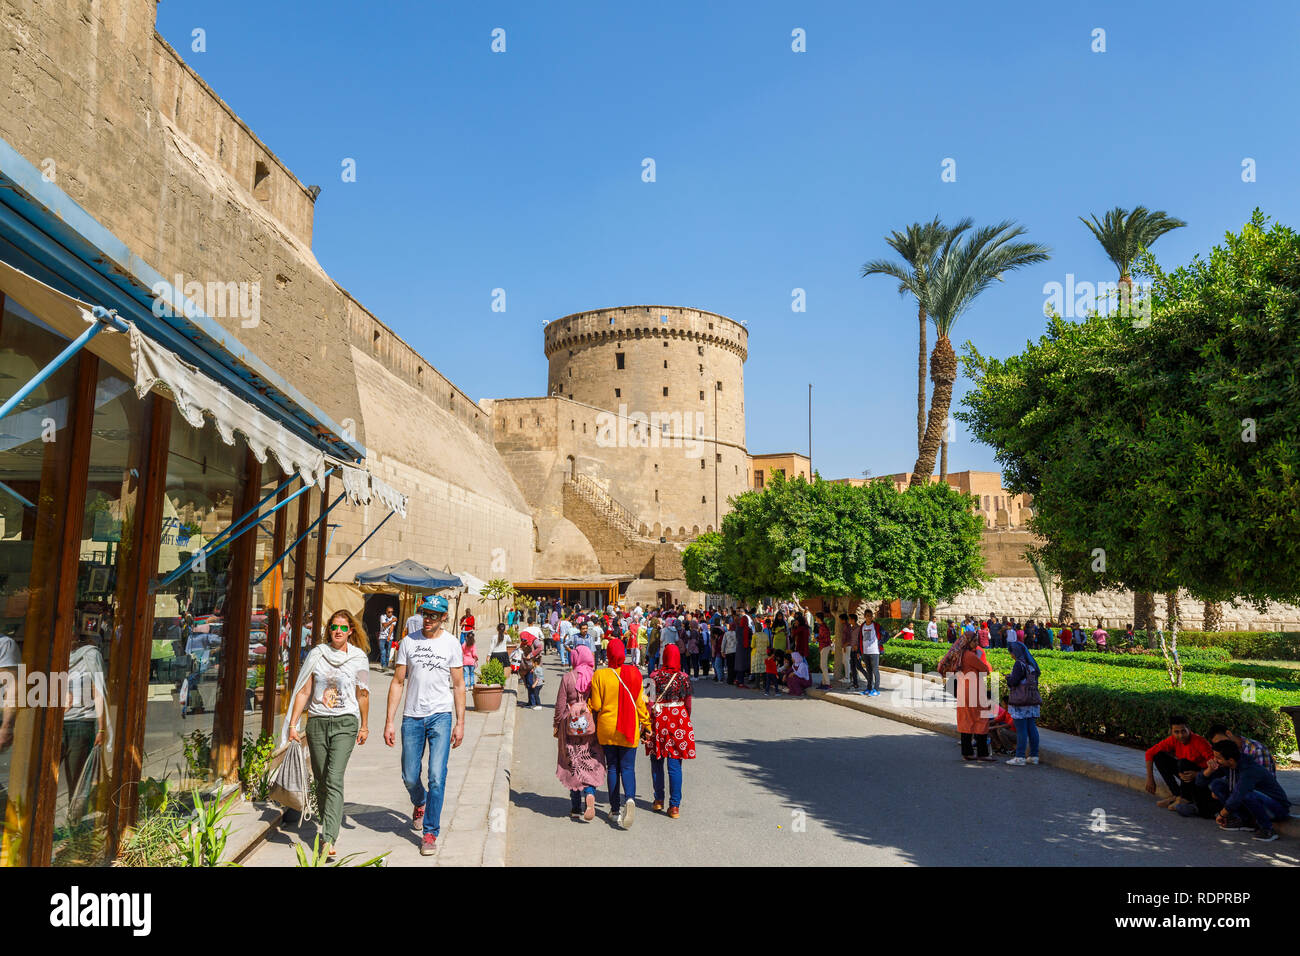 View outside the walls of the entrance to Saladin Citadel, a medieval Islamic fortification in  Cairo, Egypt Stock Photo